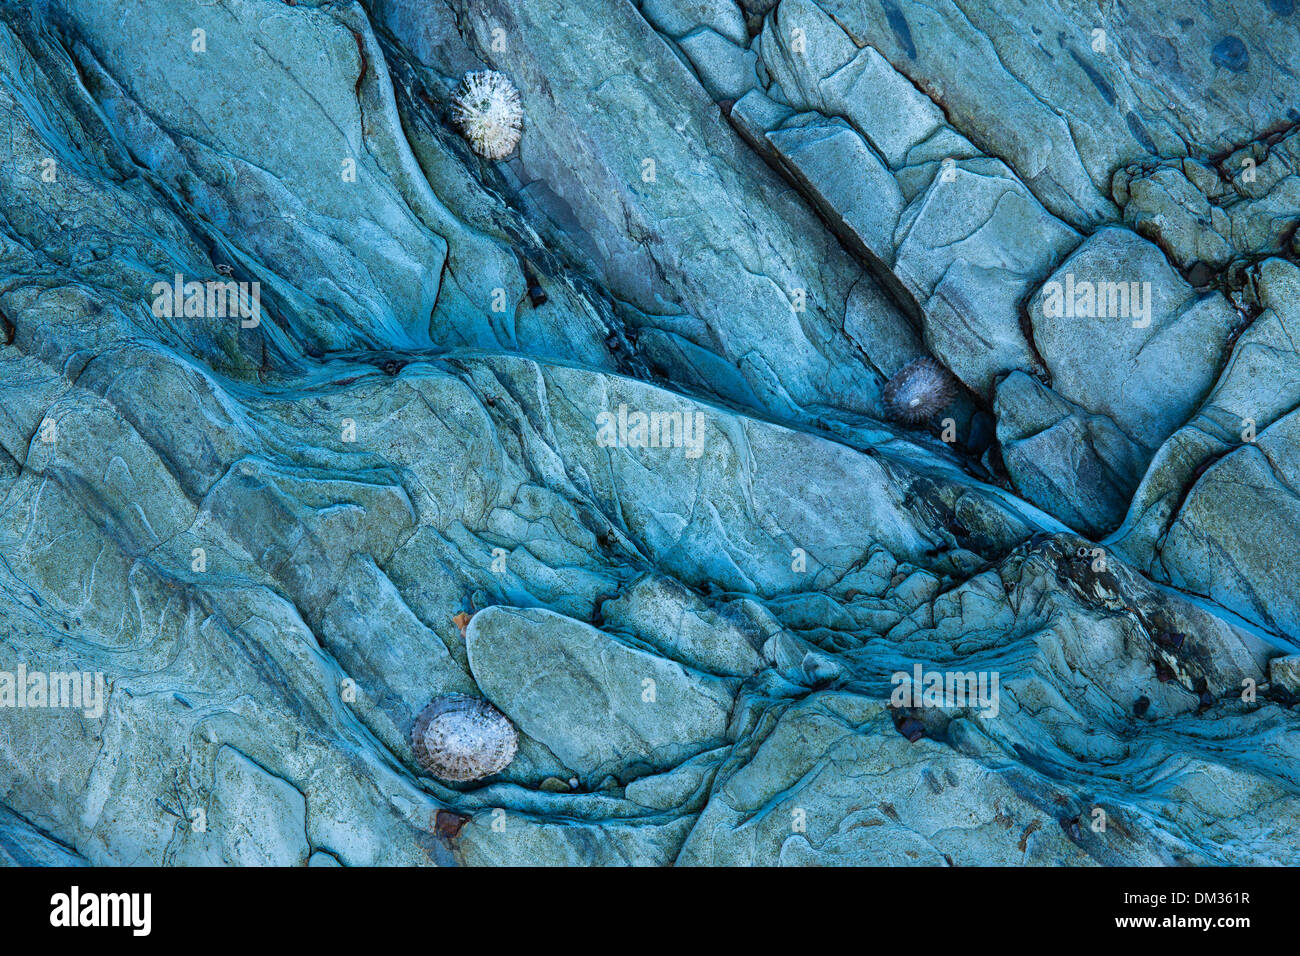 nature's textures; rocks on the beach at Whitesands, nr St David's, Pembrokeshire, Wales Stock Photo